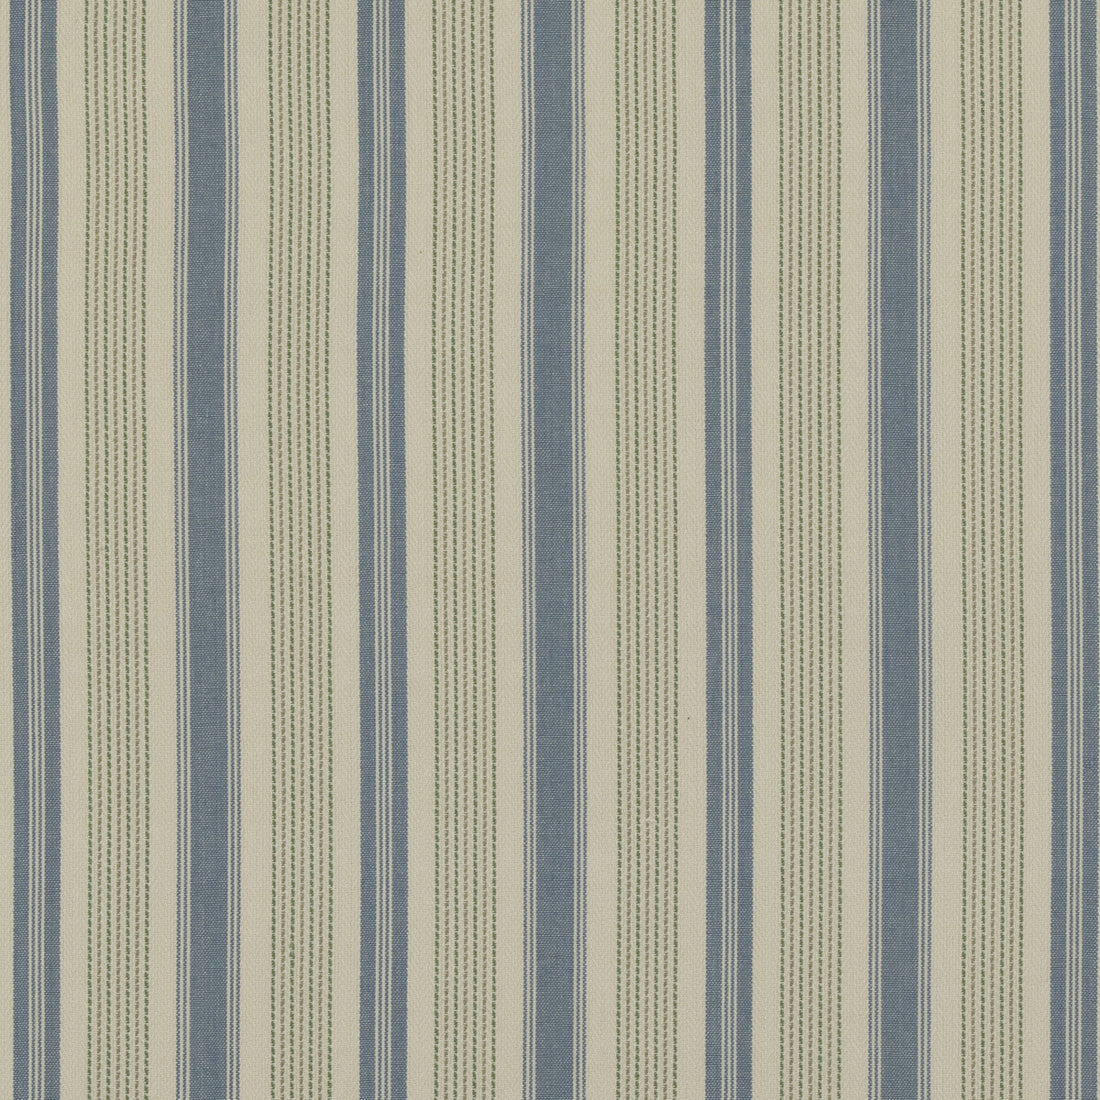 Purbeck Stripe fabric in blue/green color - pattern PF50507.1.0 - by Baker Lifestyle in the Bridport collection